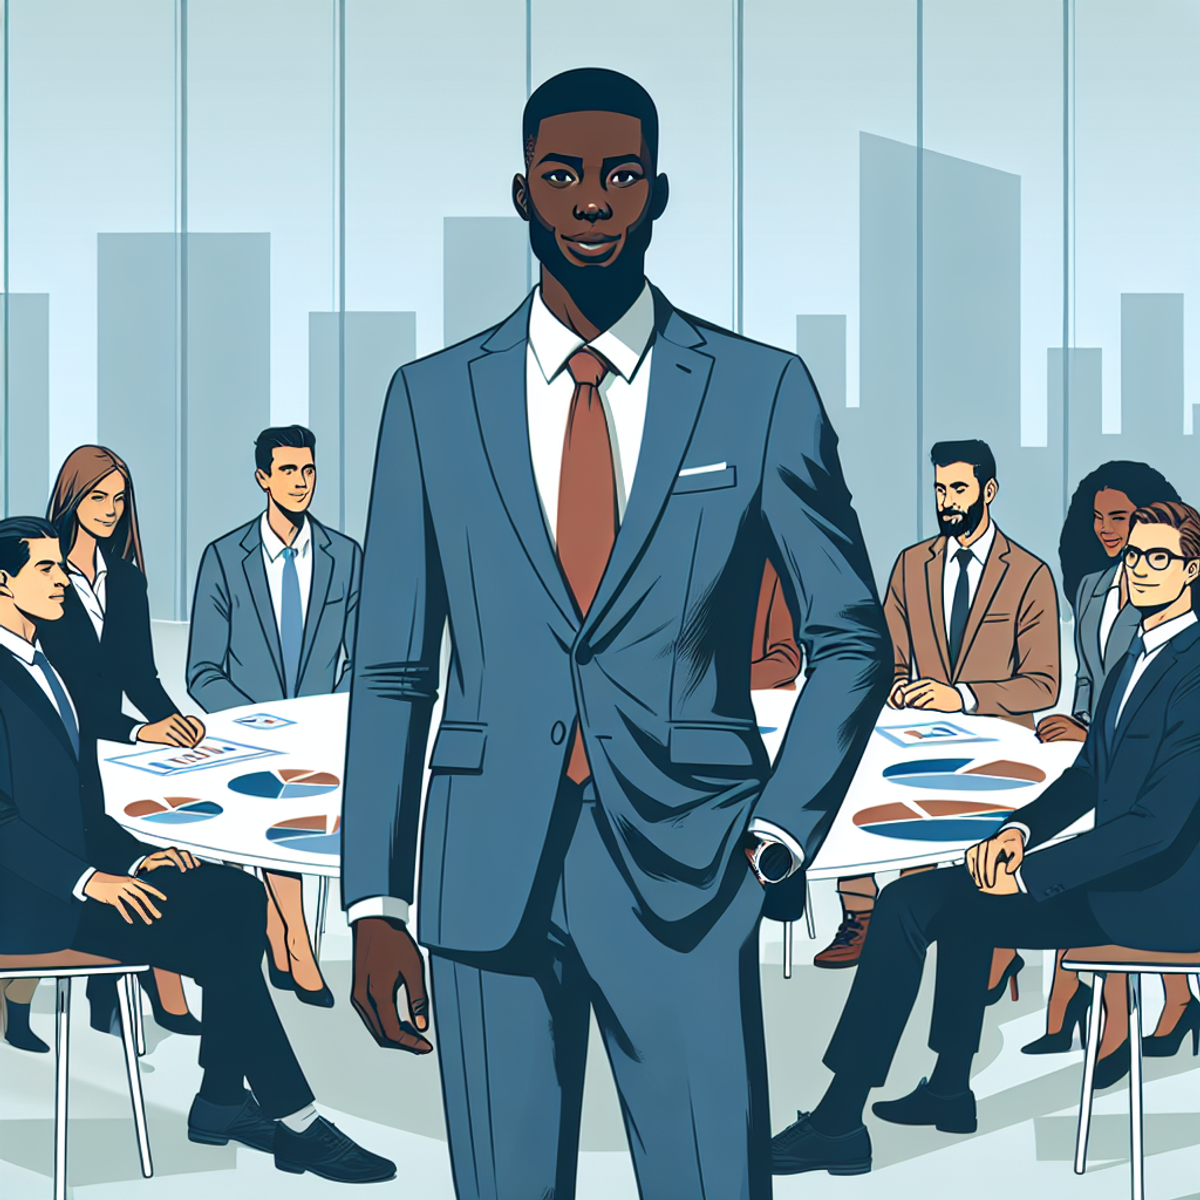 A confident Black financial advisor stands in a modern office surrounded by a diverse group of people, including South Asian, Hispanic, Middle-Eastern, and White individuals. They engage in a round-table discussion, symbolizing unity and guidance towards financial goals.